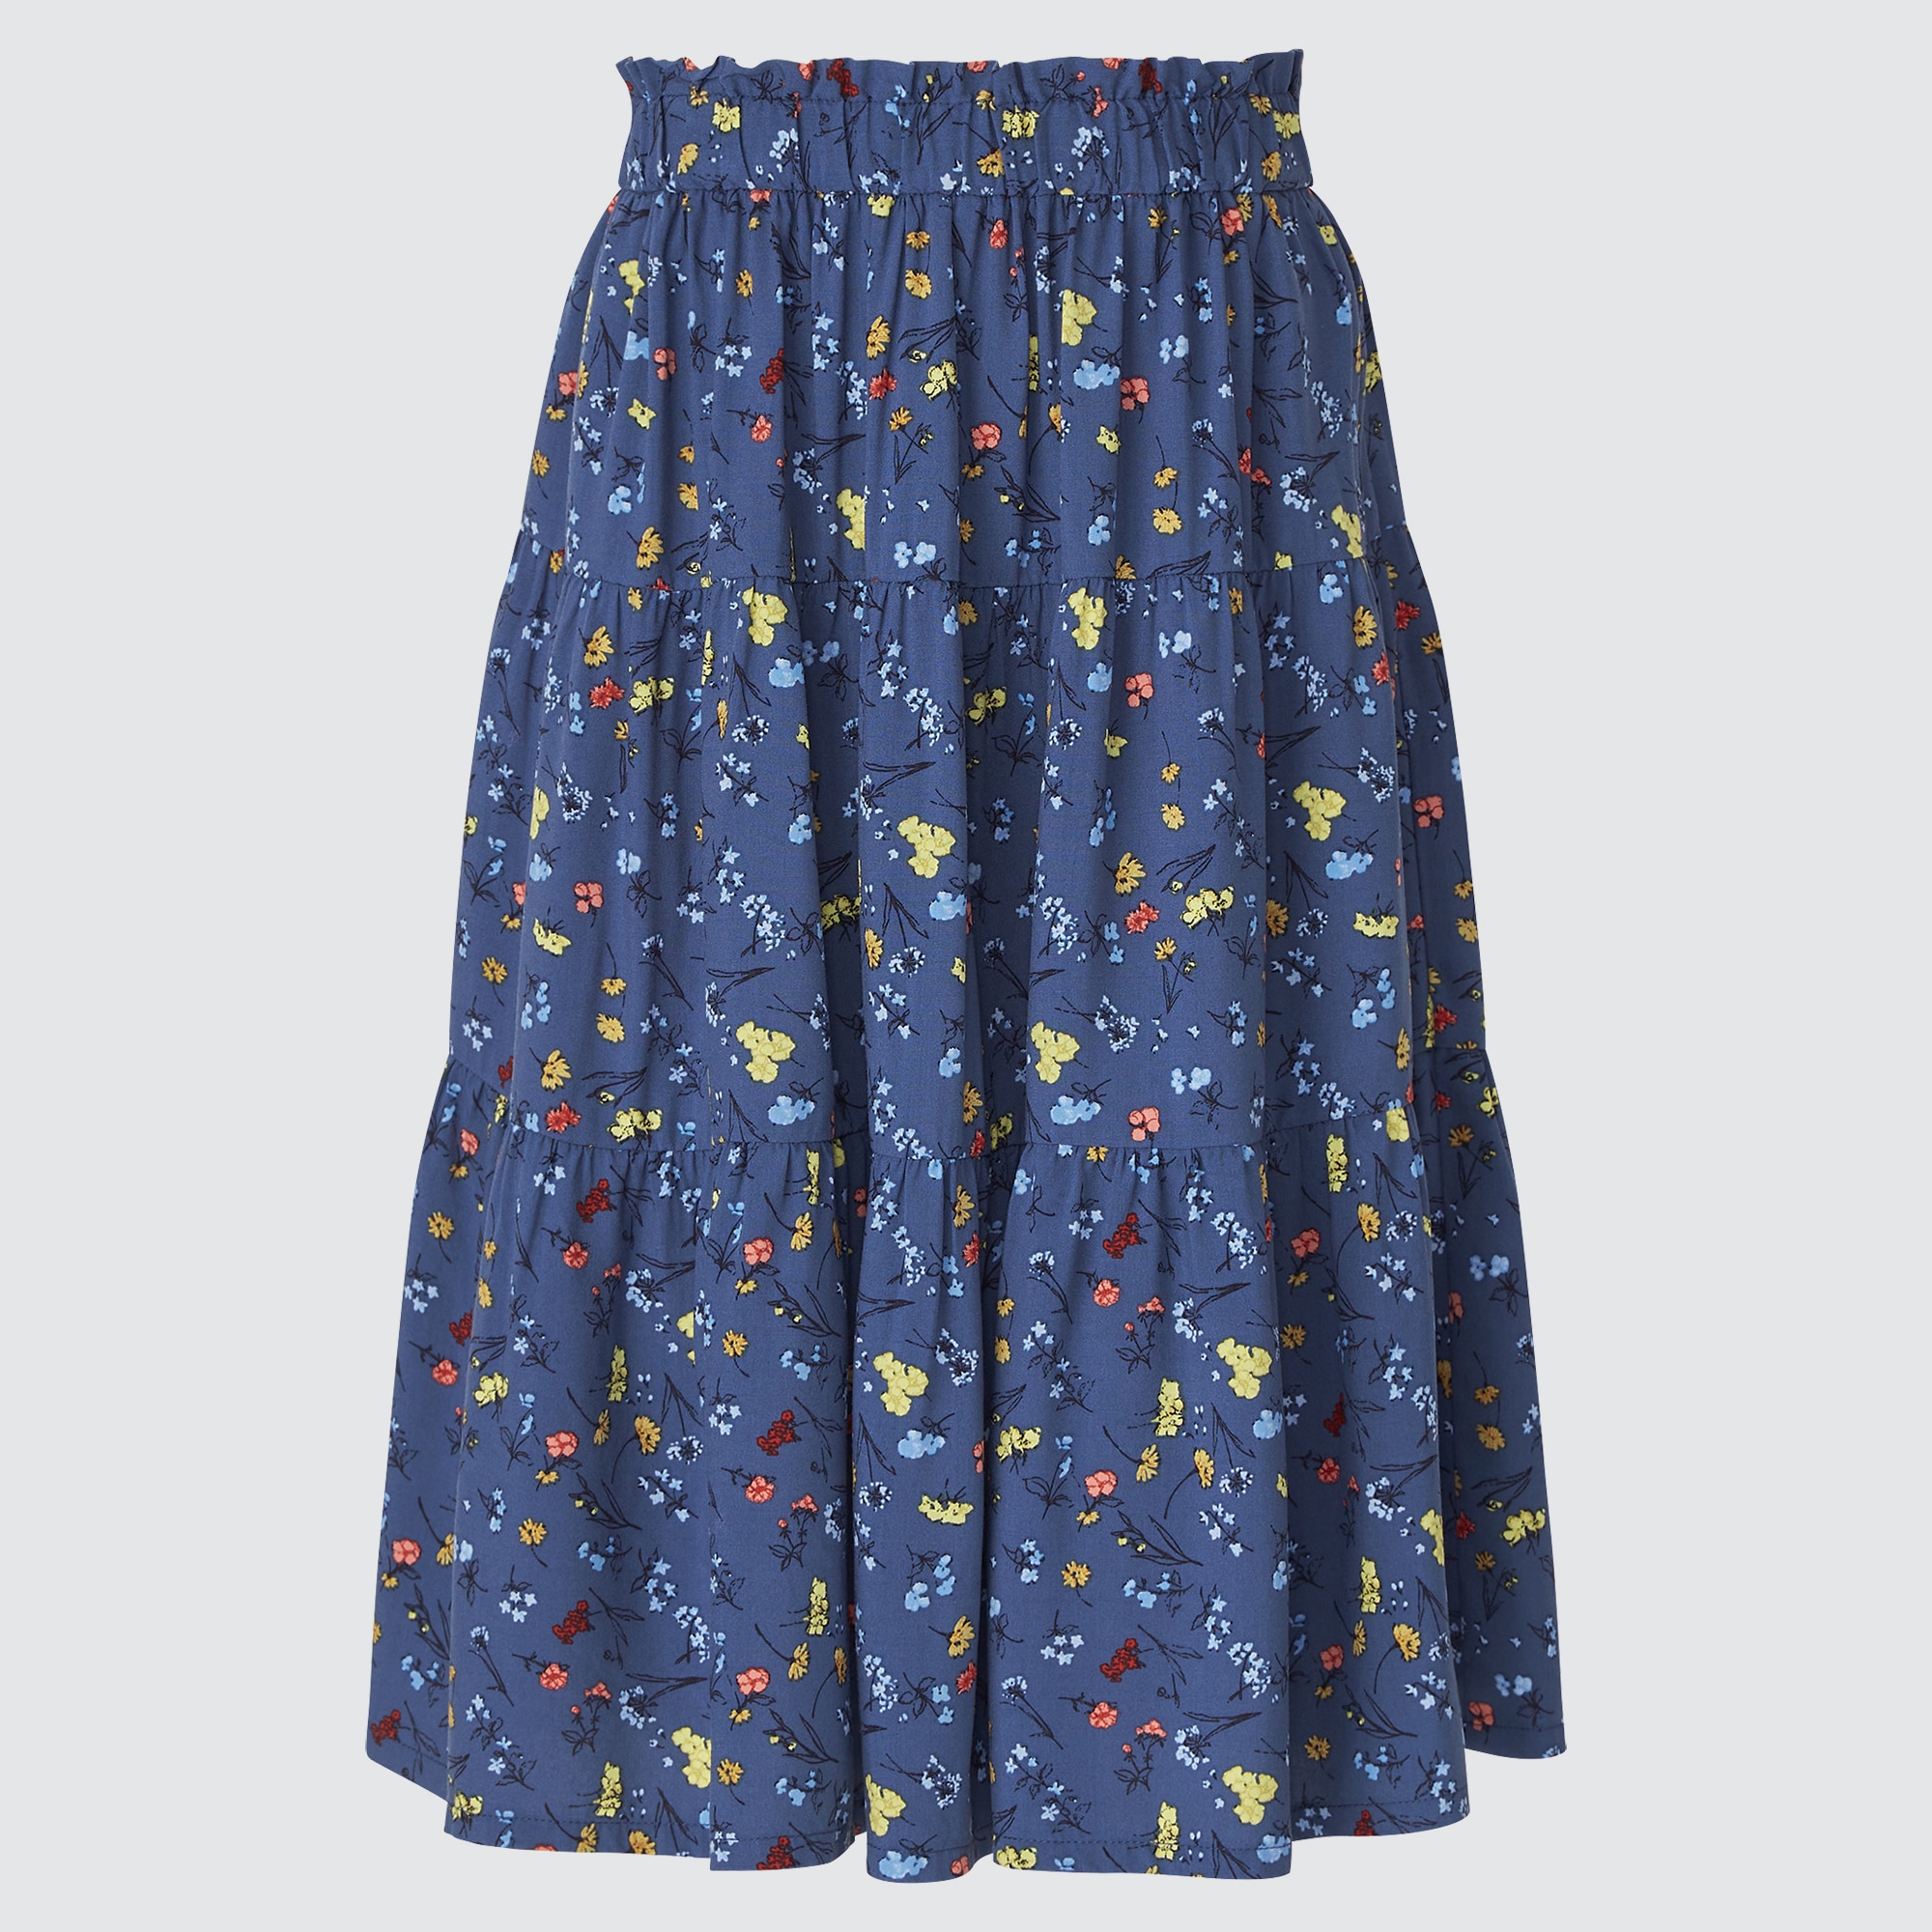 UNIQLO Tiered Printed Skirt | StyleHint